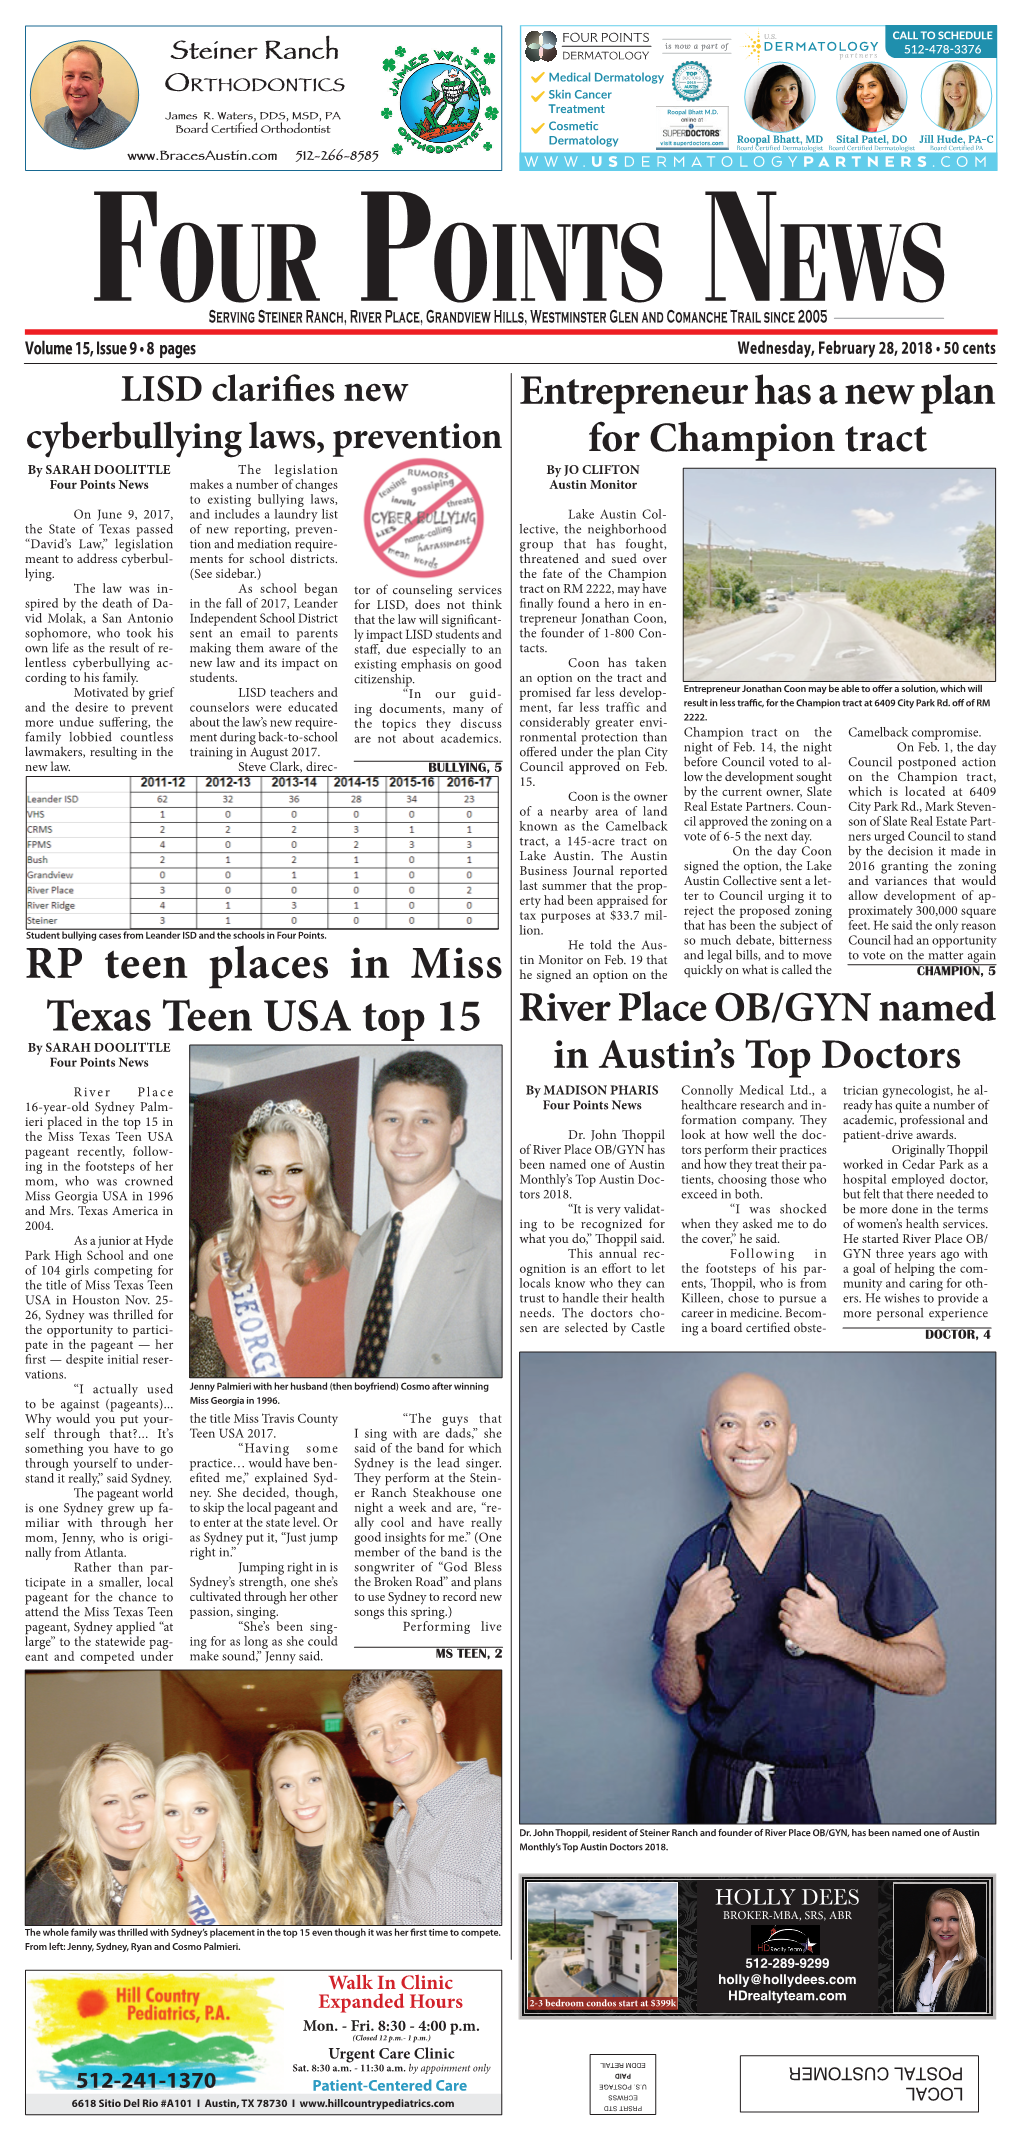 RP Teen Places in Miss Texas Teen USA Top 15